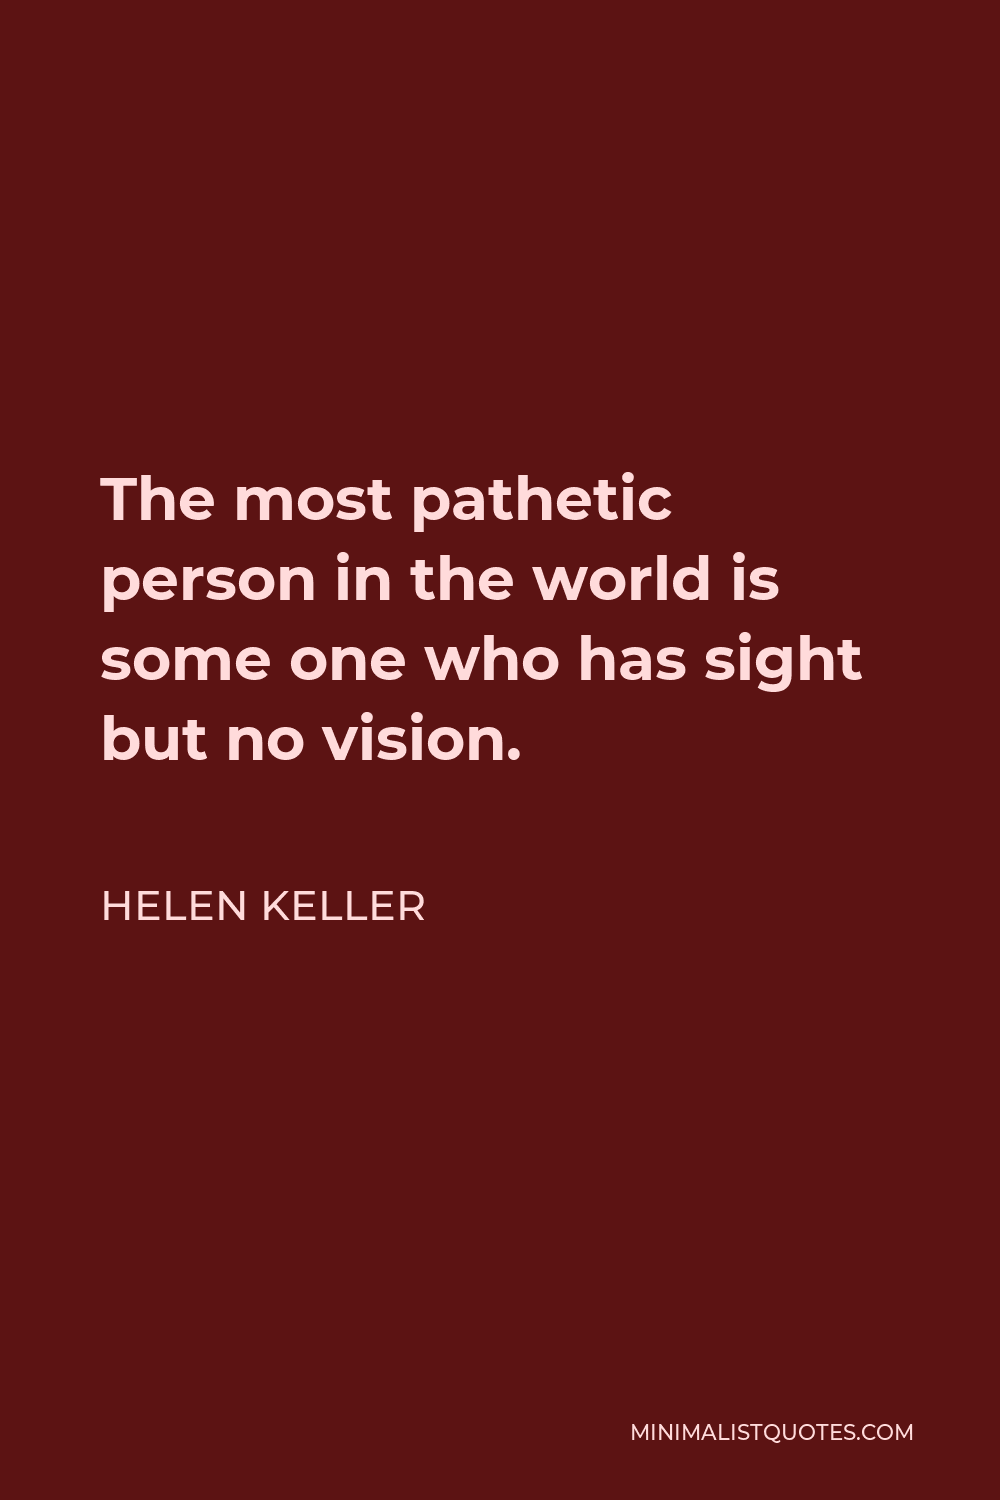 Helen Keller Quote - The most pathetic person in the world is some one who has sight but no vision.